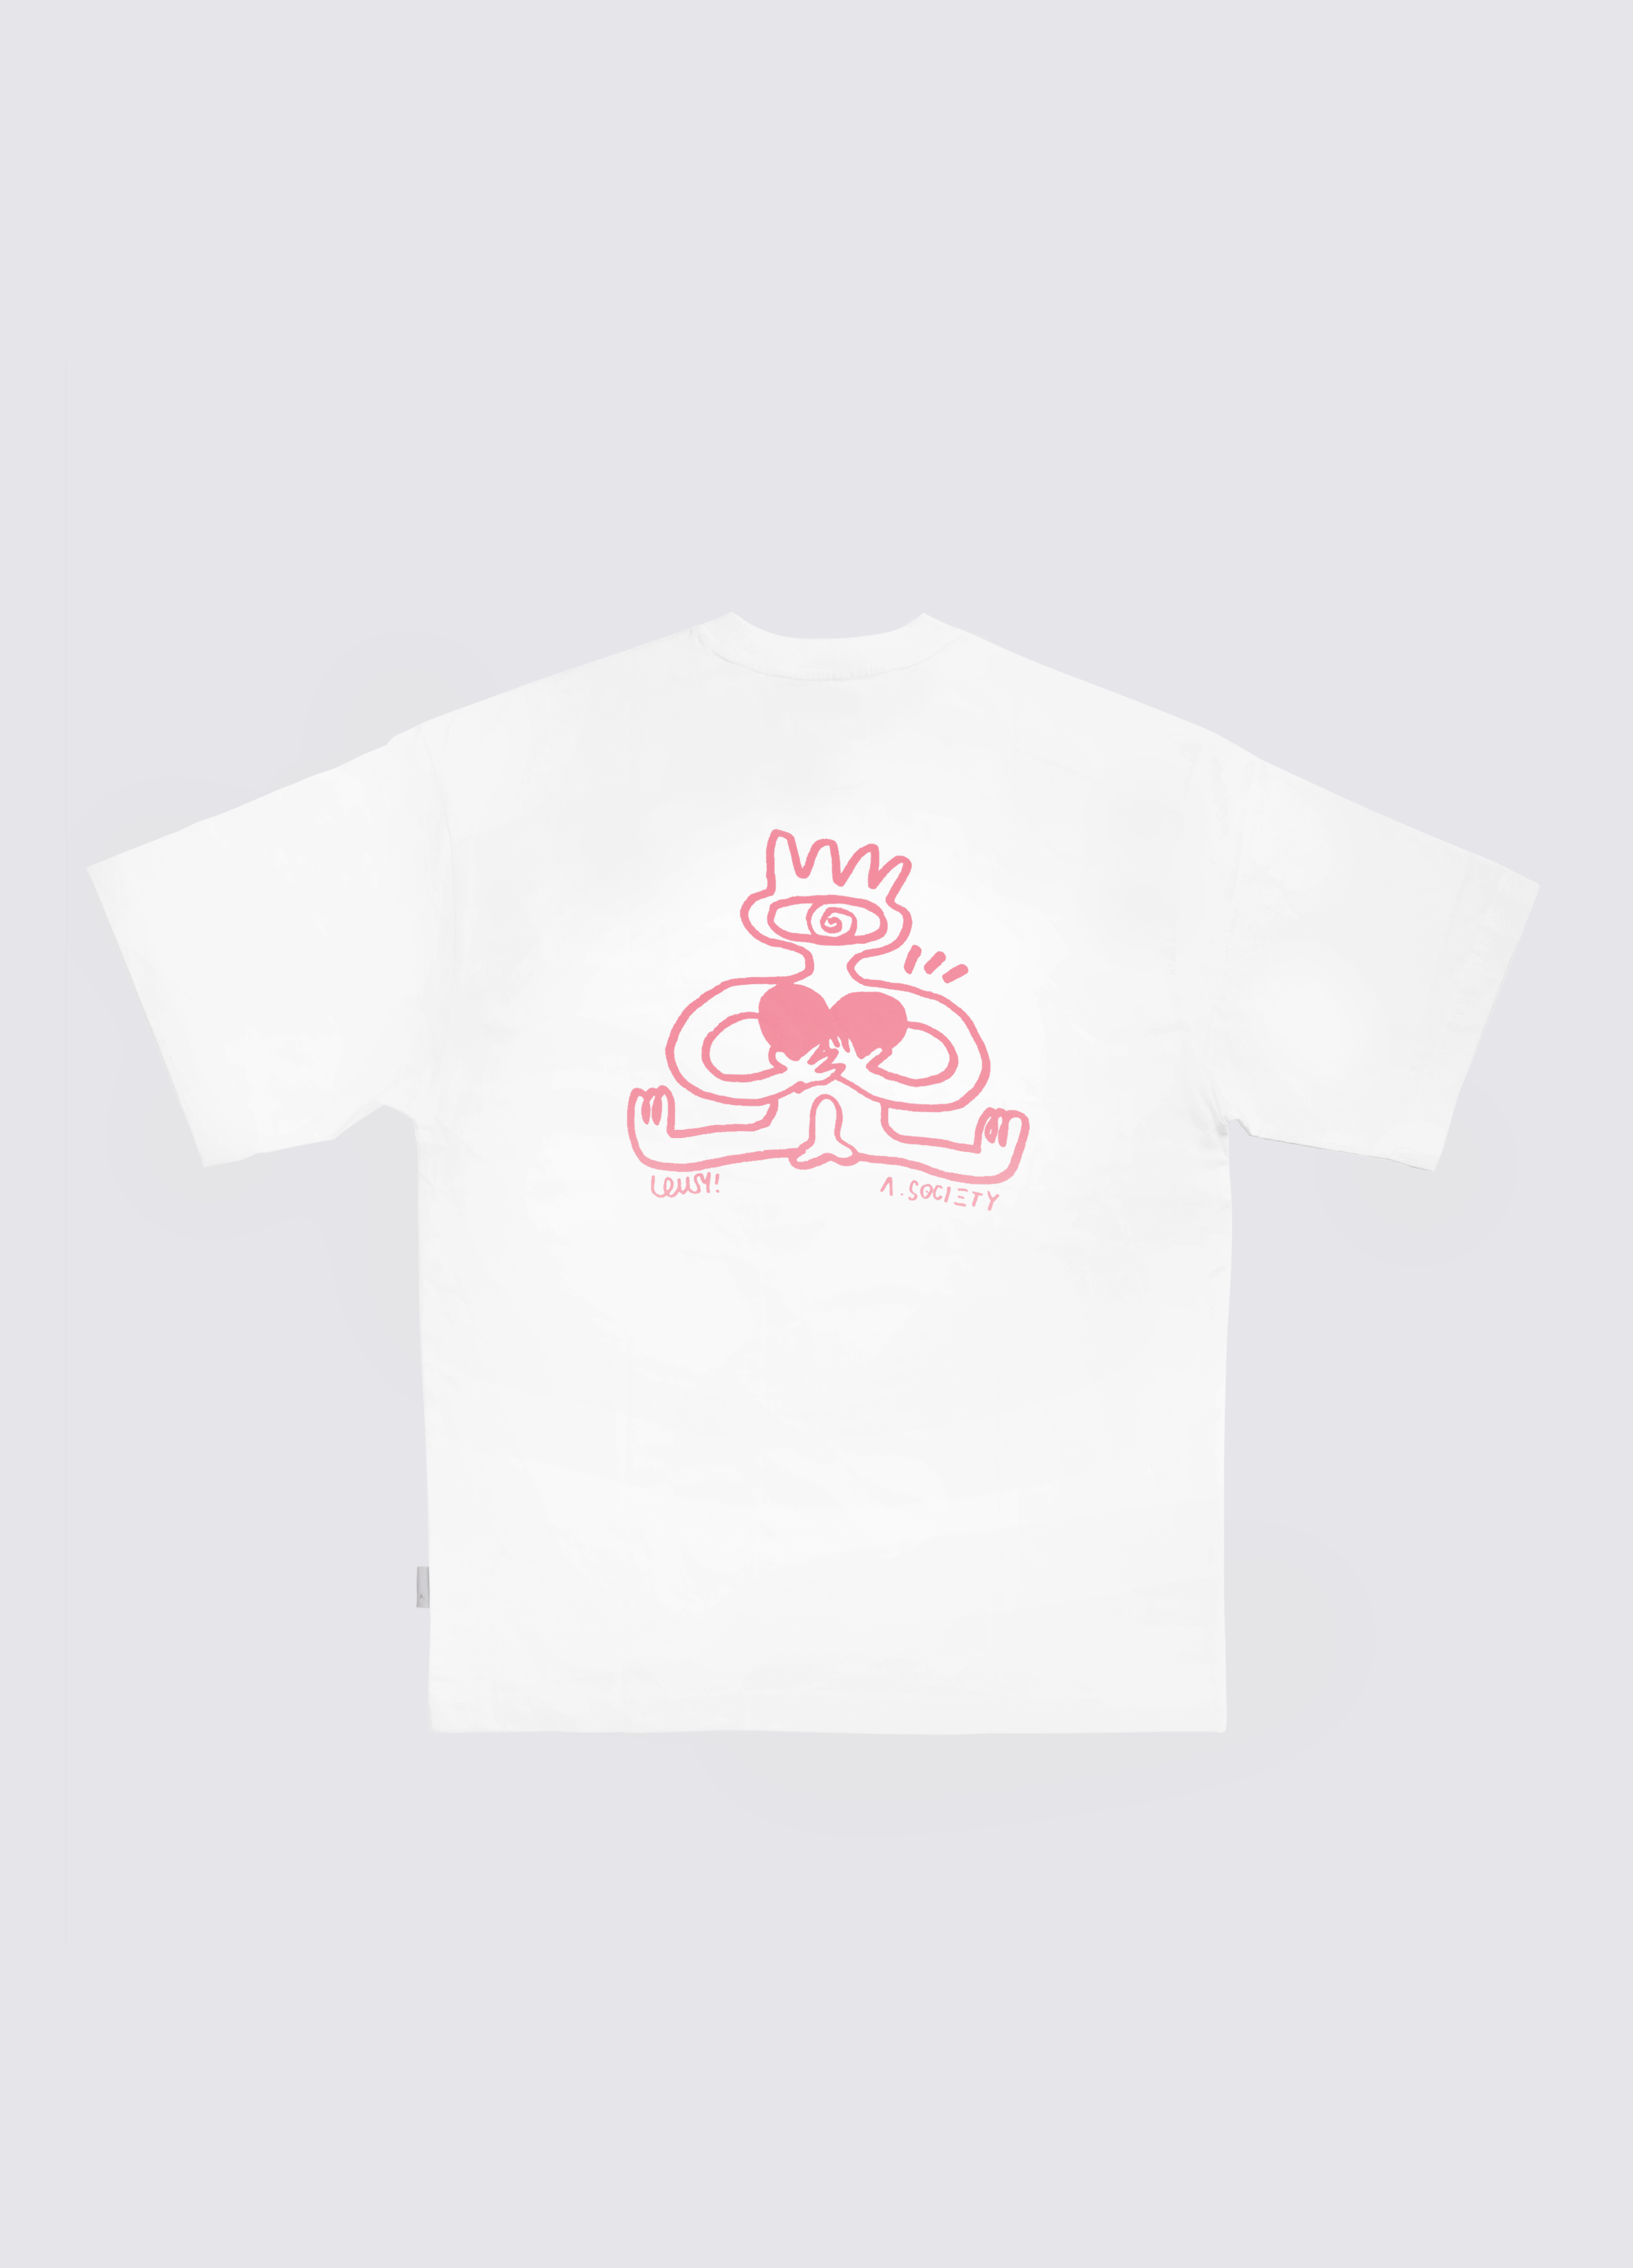 LOUSY Limited Edition T-Shirts - White